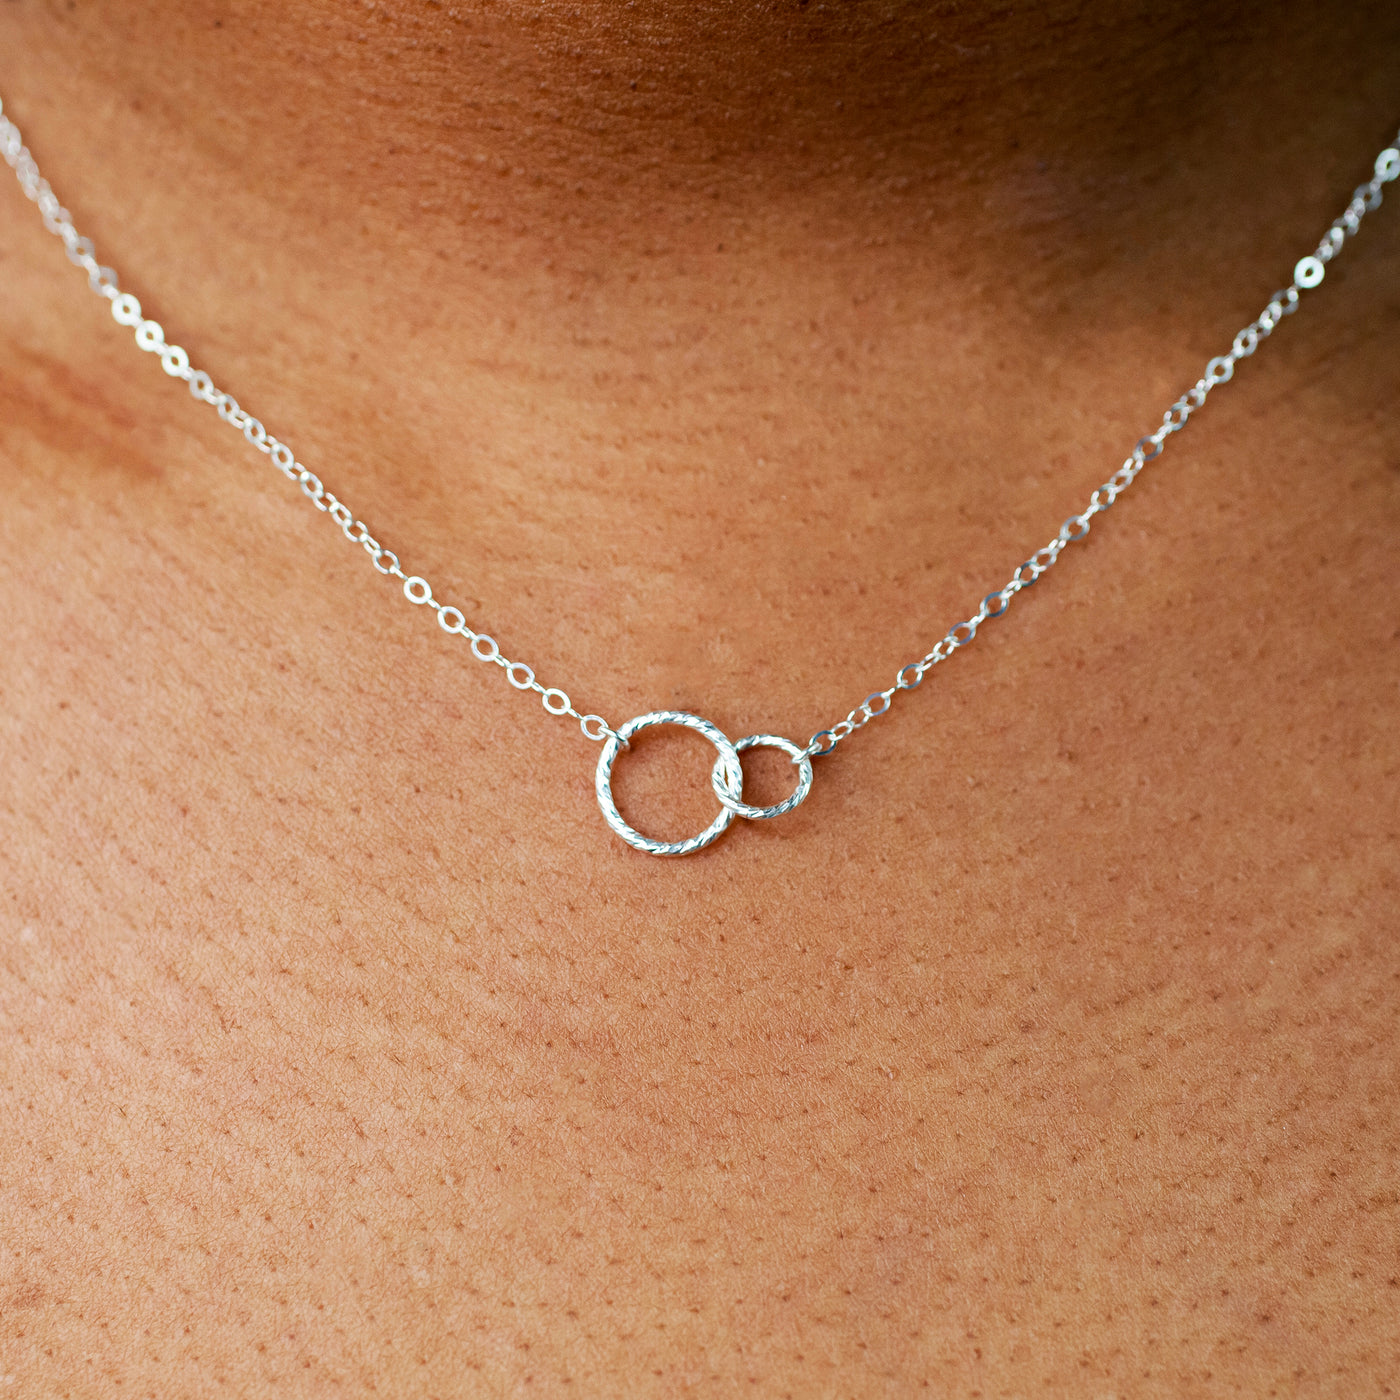 4pc Round Jewelry Links Silver, Ring Pendant Connector, Necklace Links,  Organic Shaped, Earrings Loops, Circle Pendant, Hoop Pendant,dangles 